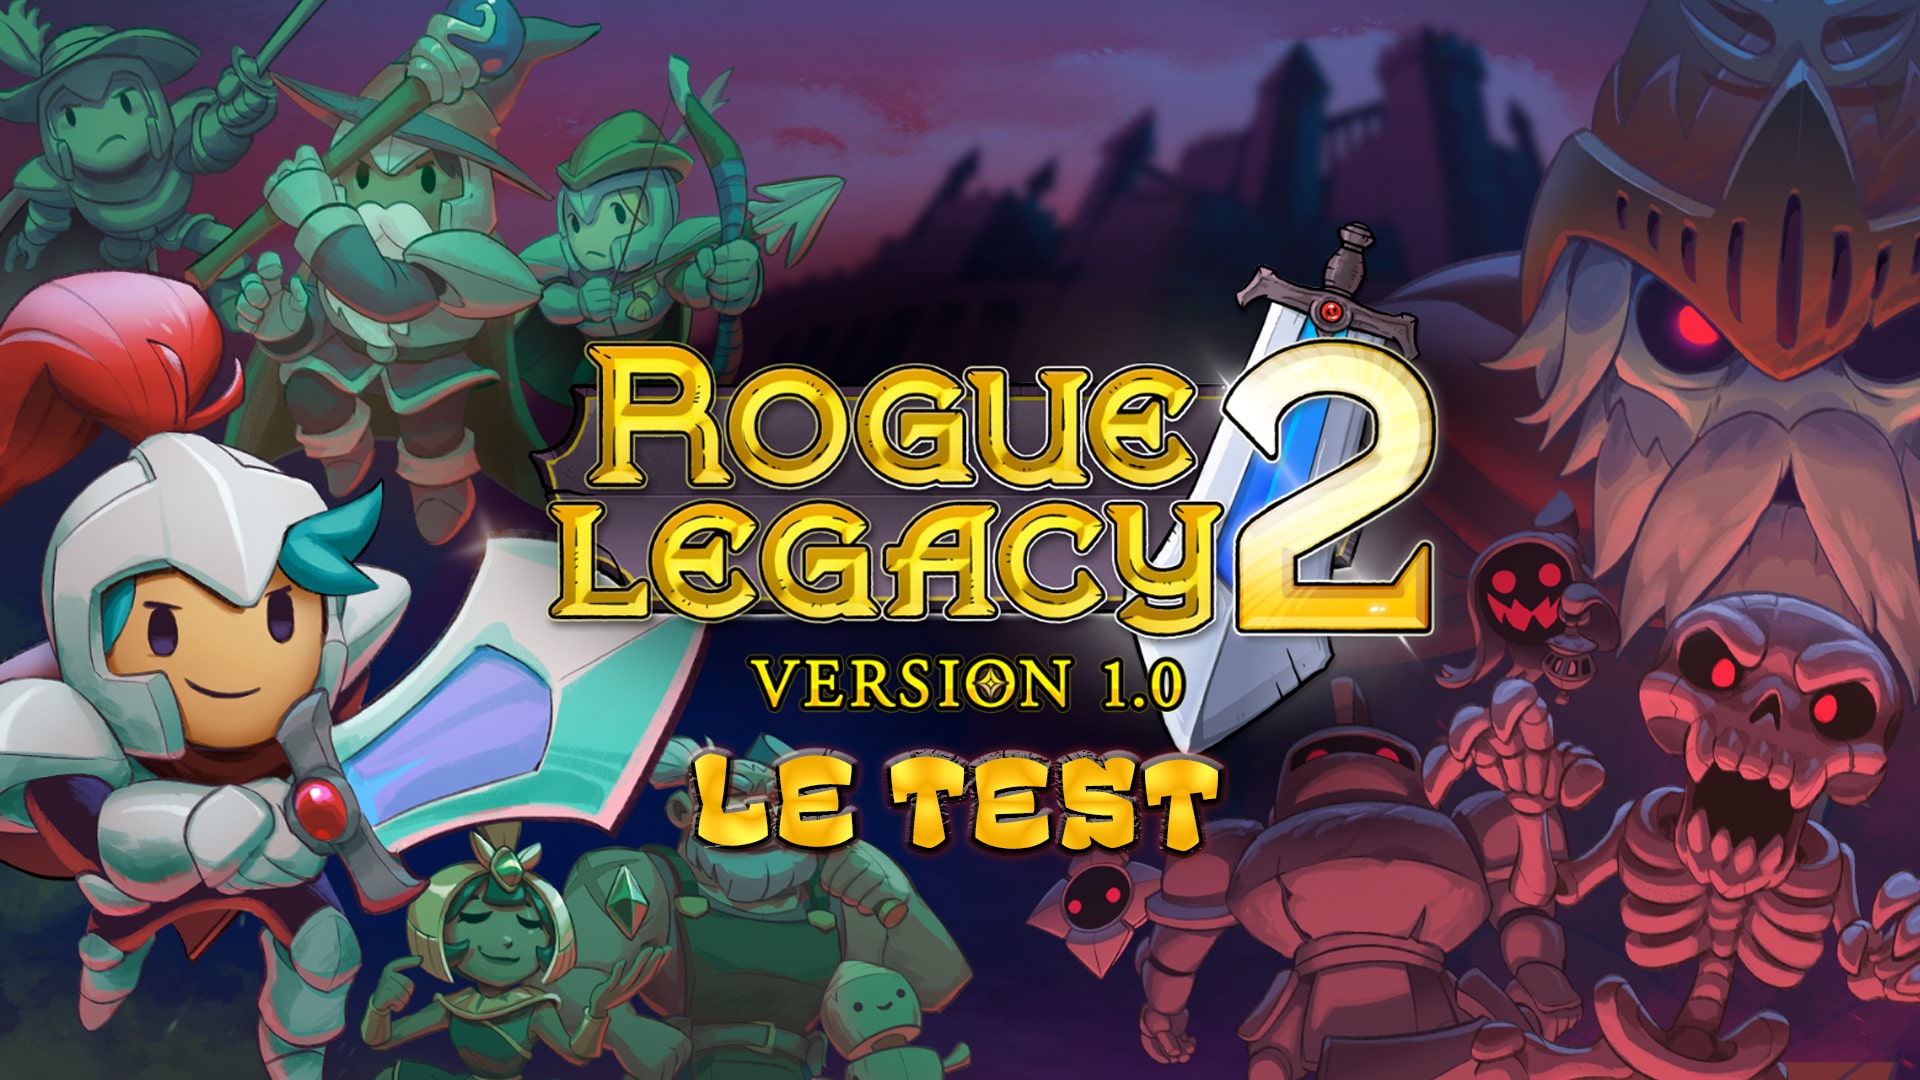 rogue legacy 2 xbox one price